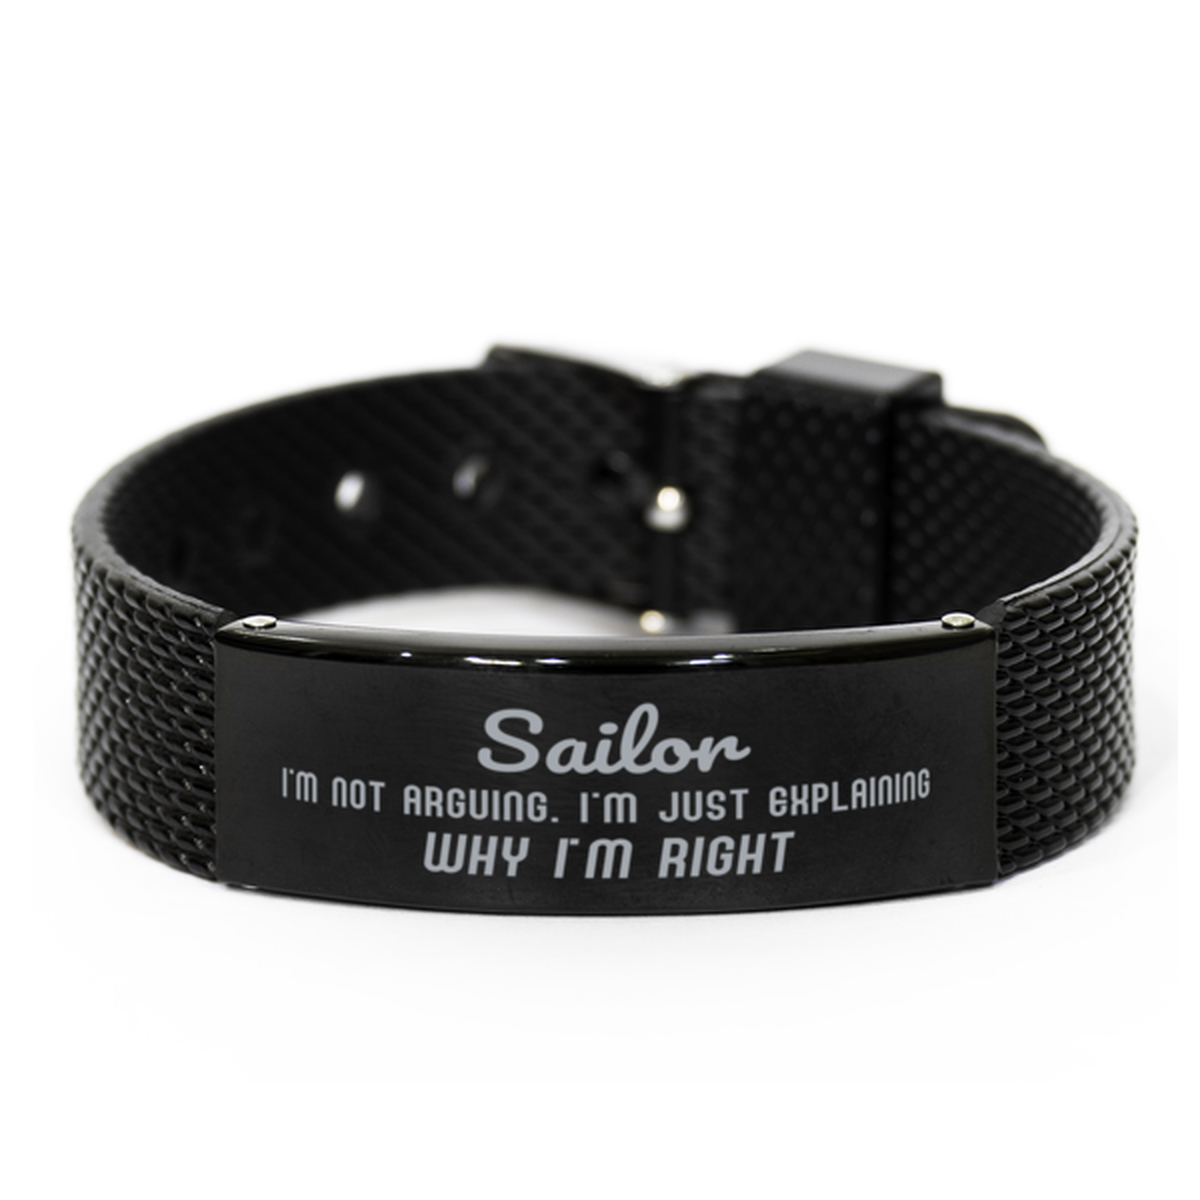 Sailor I'm not Arguing. I'm Just Explaining Why I'm RIGHT Black Shark Mesh Bracelet, Funny Saying Quote Sailor Gifts For Sailor Graduation Birthday Christmas Gifts for Men Women Coworker